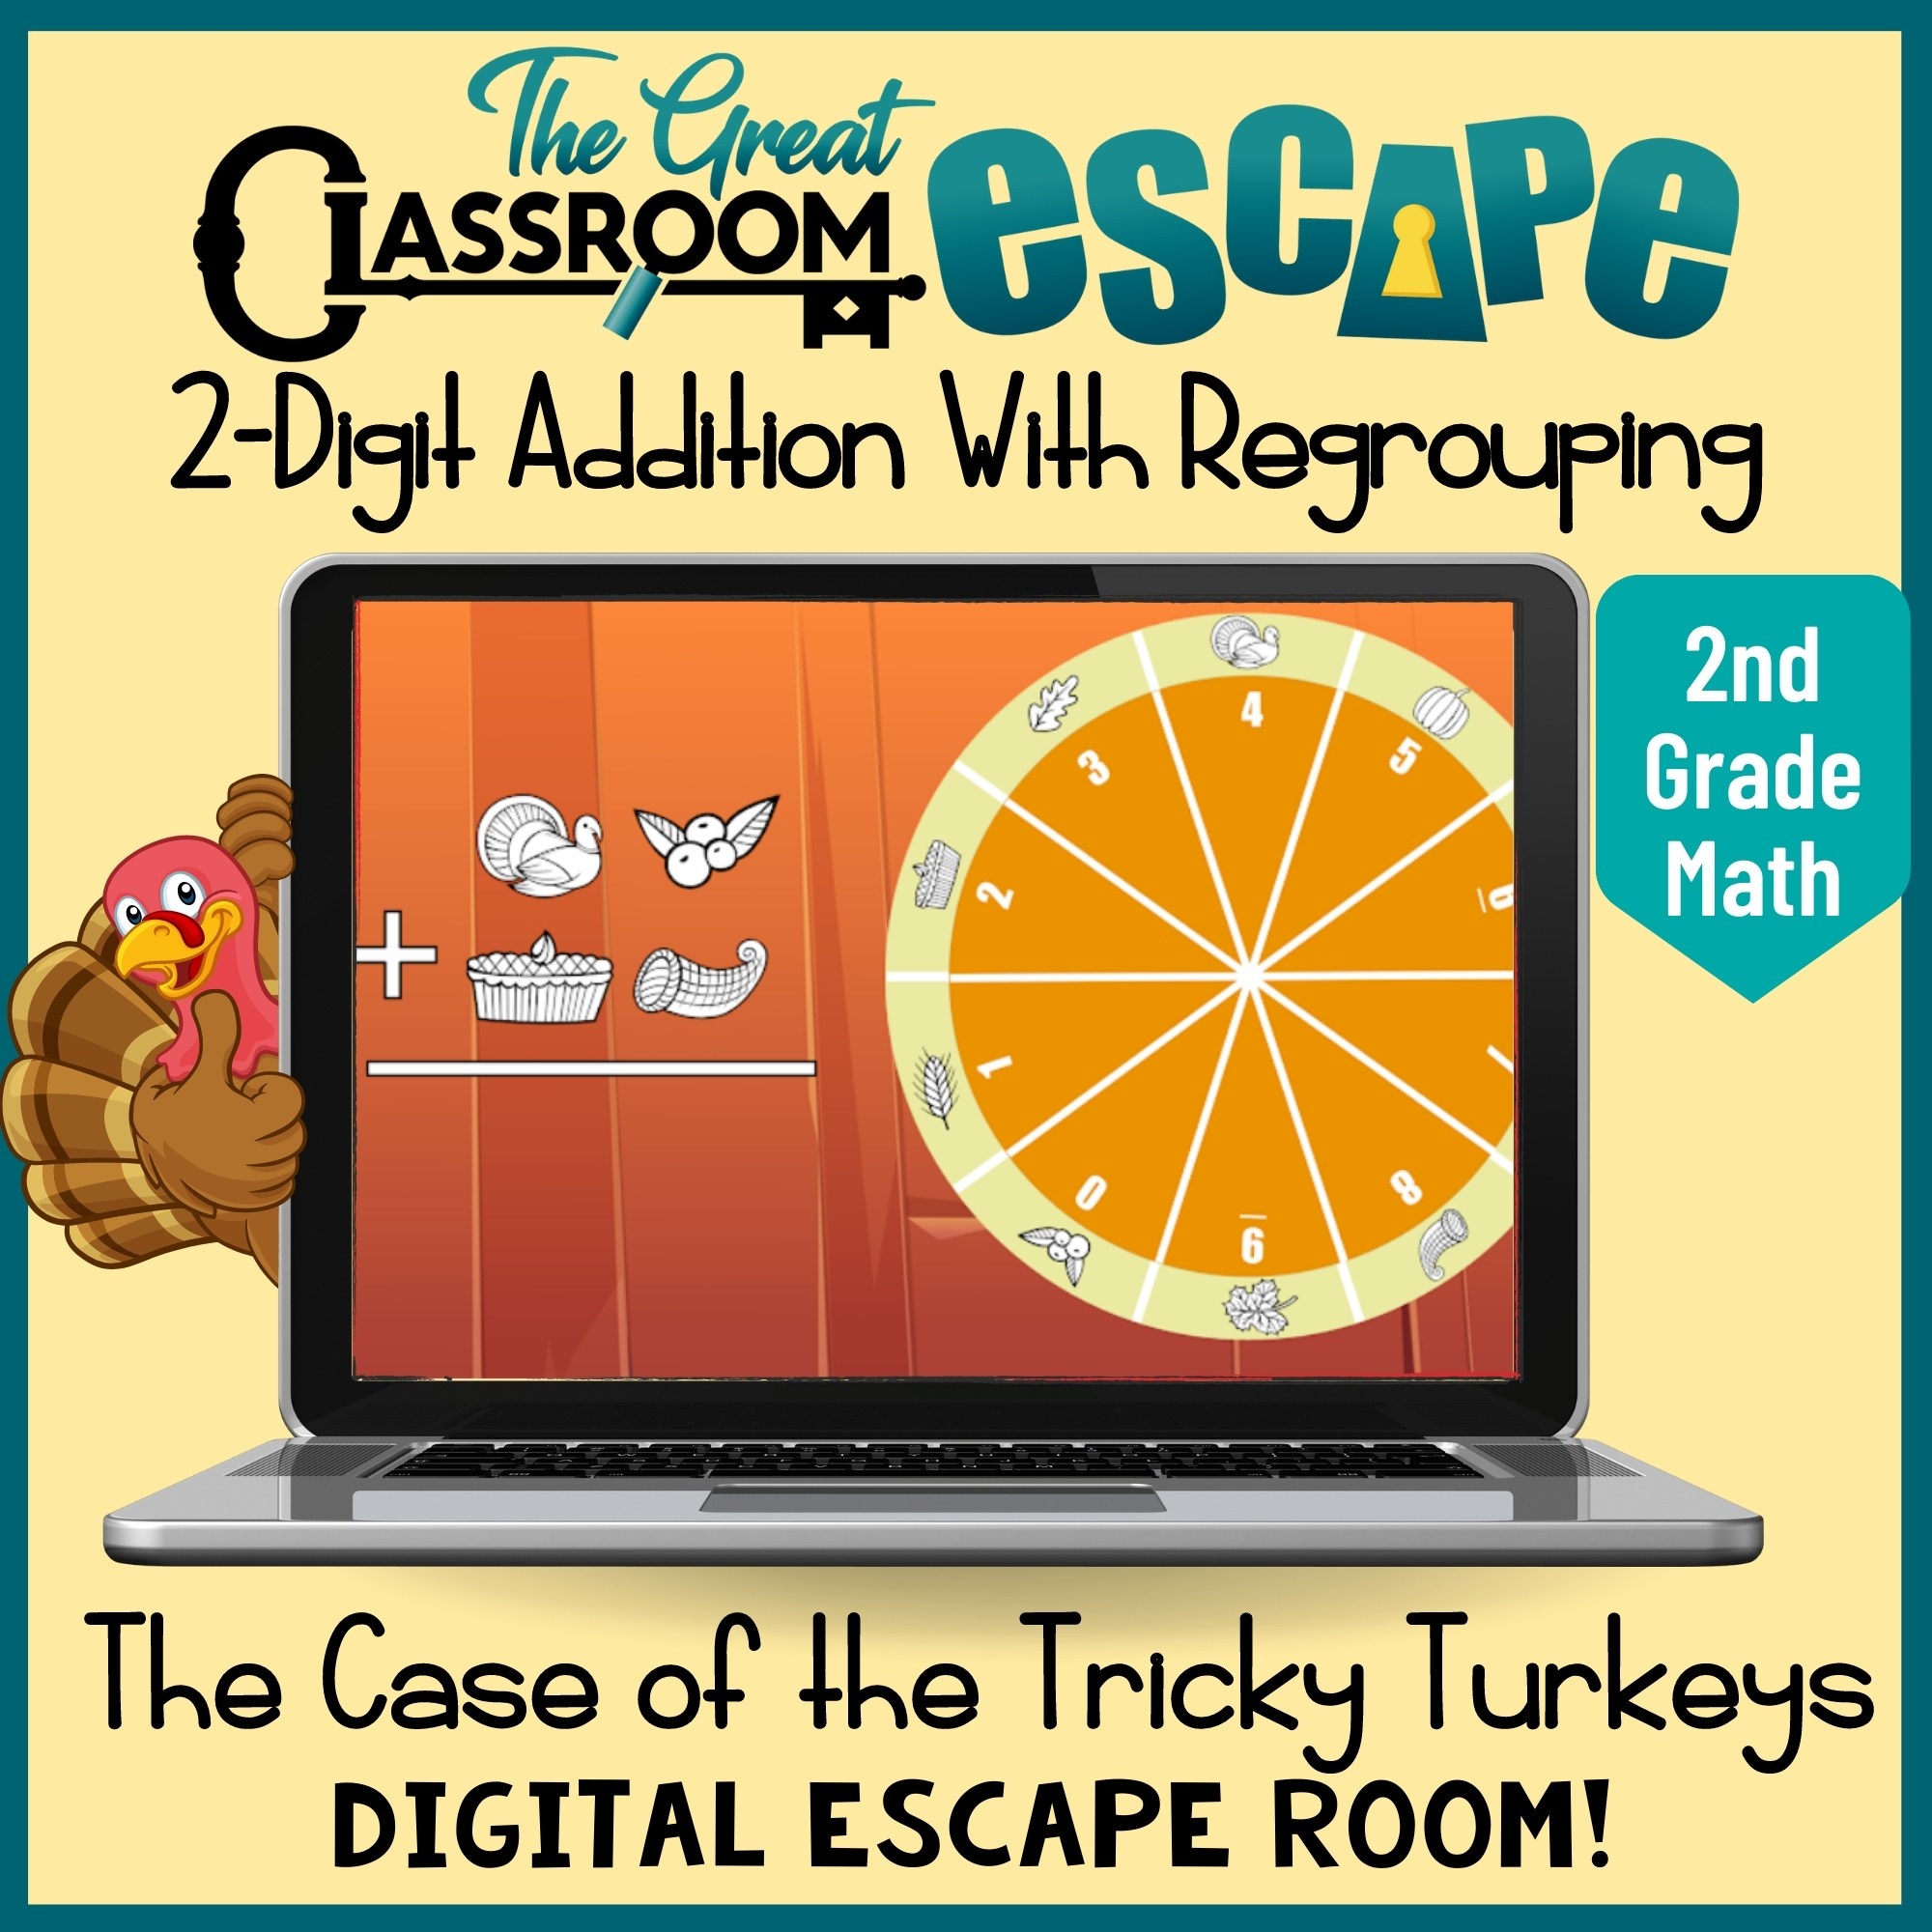 two-digit-addition-with-regrouping-2nd-grade-math-thanksgiving-activity